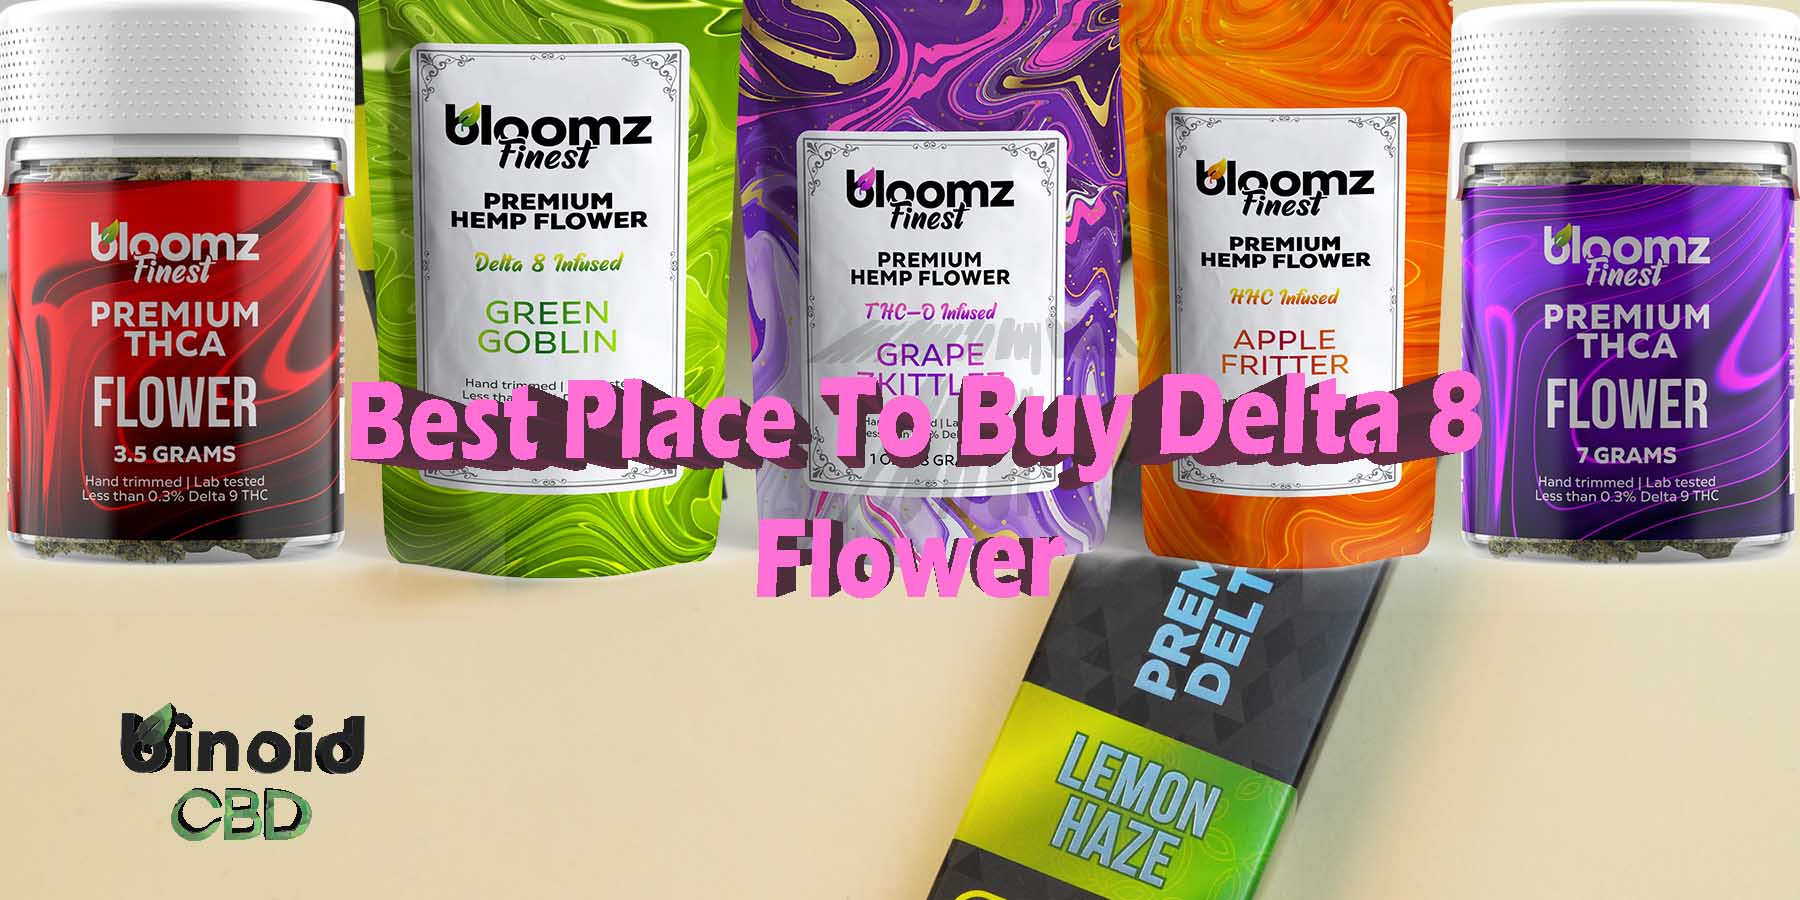 Best Place To Buy Delta 8 Online How-To Buy Delta 8 Flower Online Pre Rolls Where To Get Near Me Best Place Lowest Price Coupon Discount Strongest Brand Bloomz